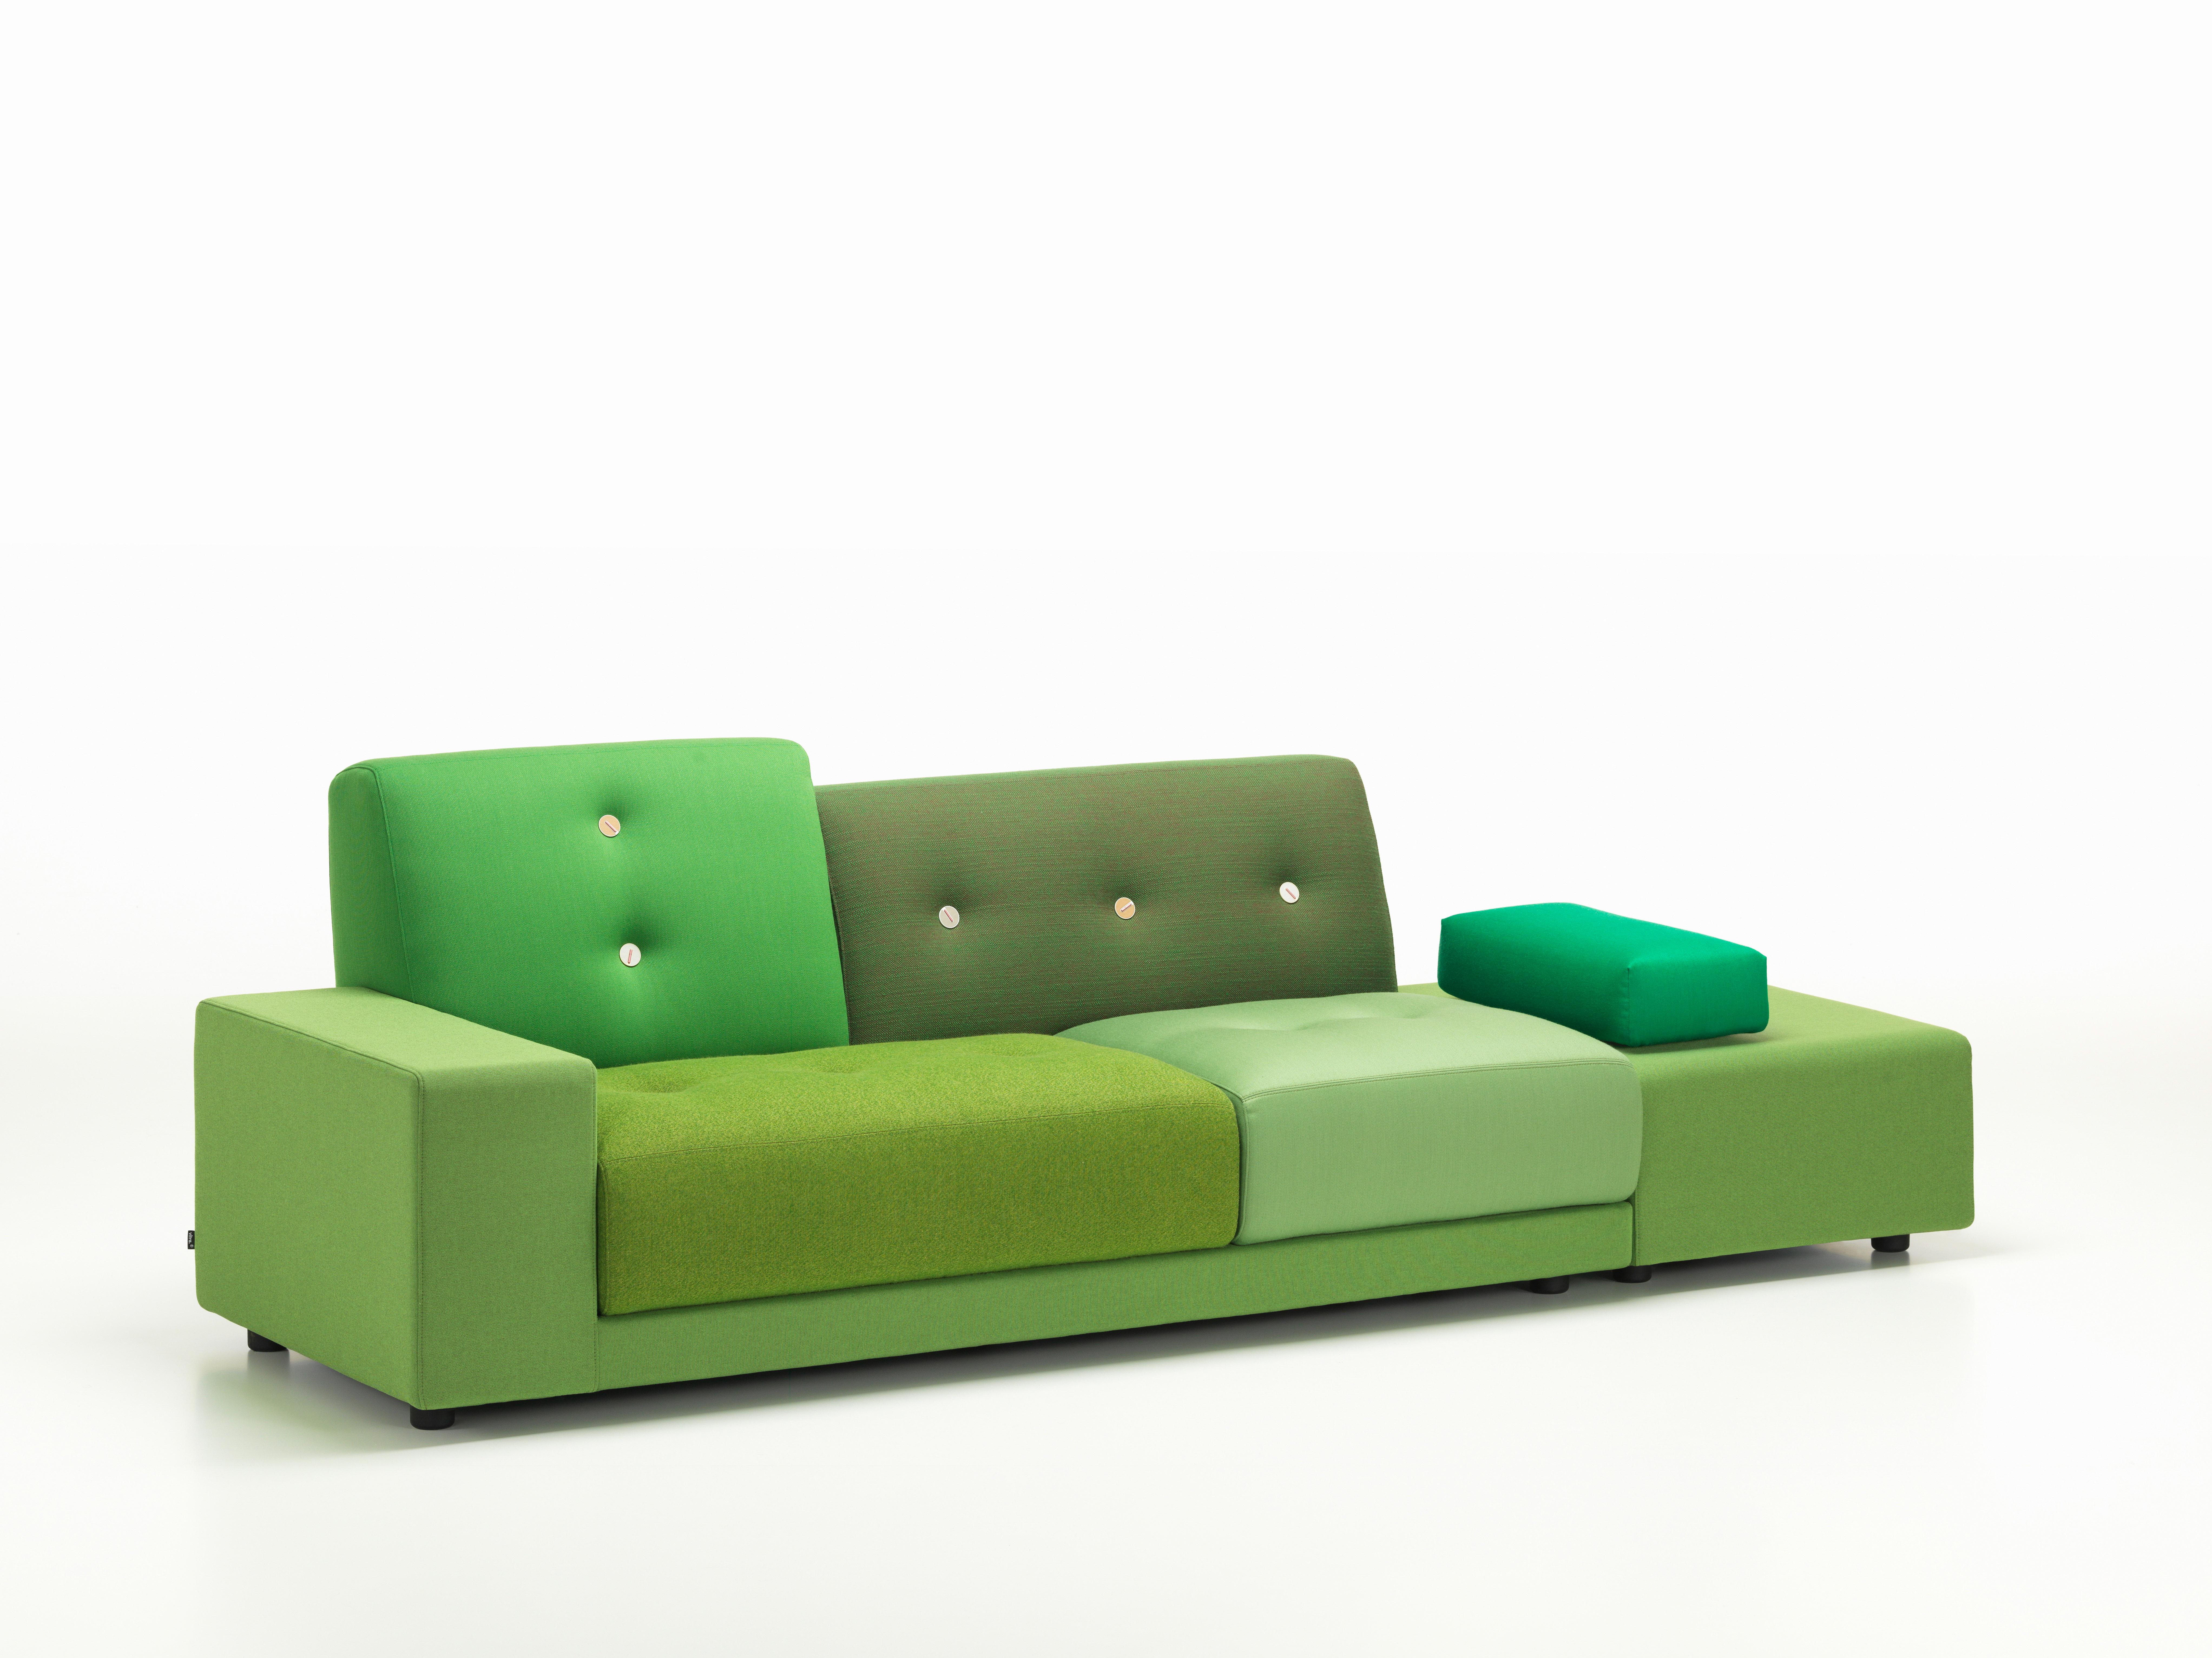 These items are currently only available in the United States.

The distinctive character of the Polder sofa by Hella Jongerius derives from the combination of diverse fabrics and colors, an asymmetrical shape and charming details. The large seat